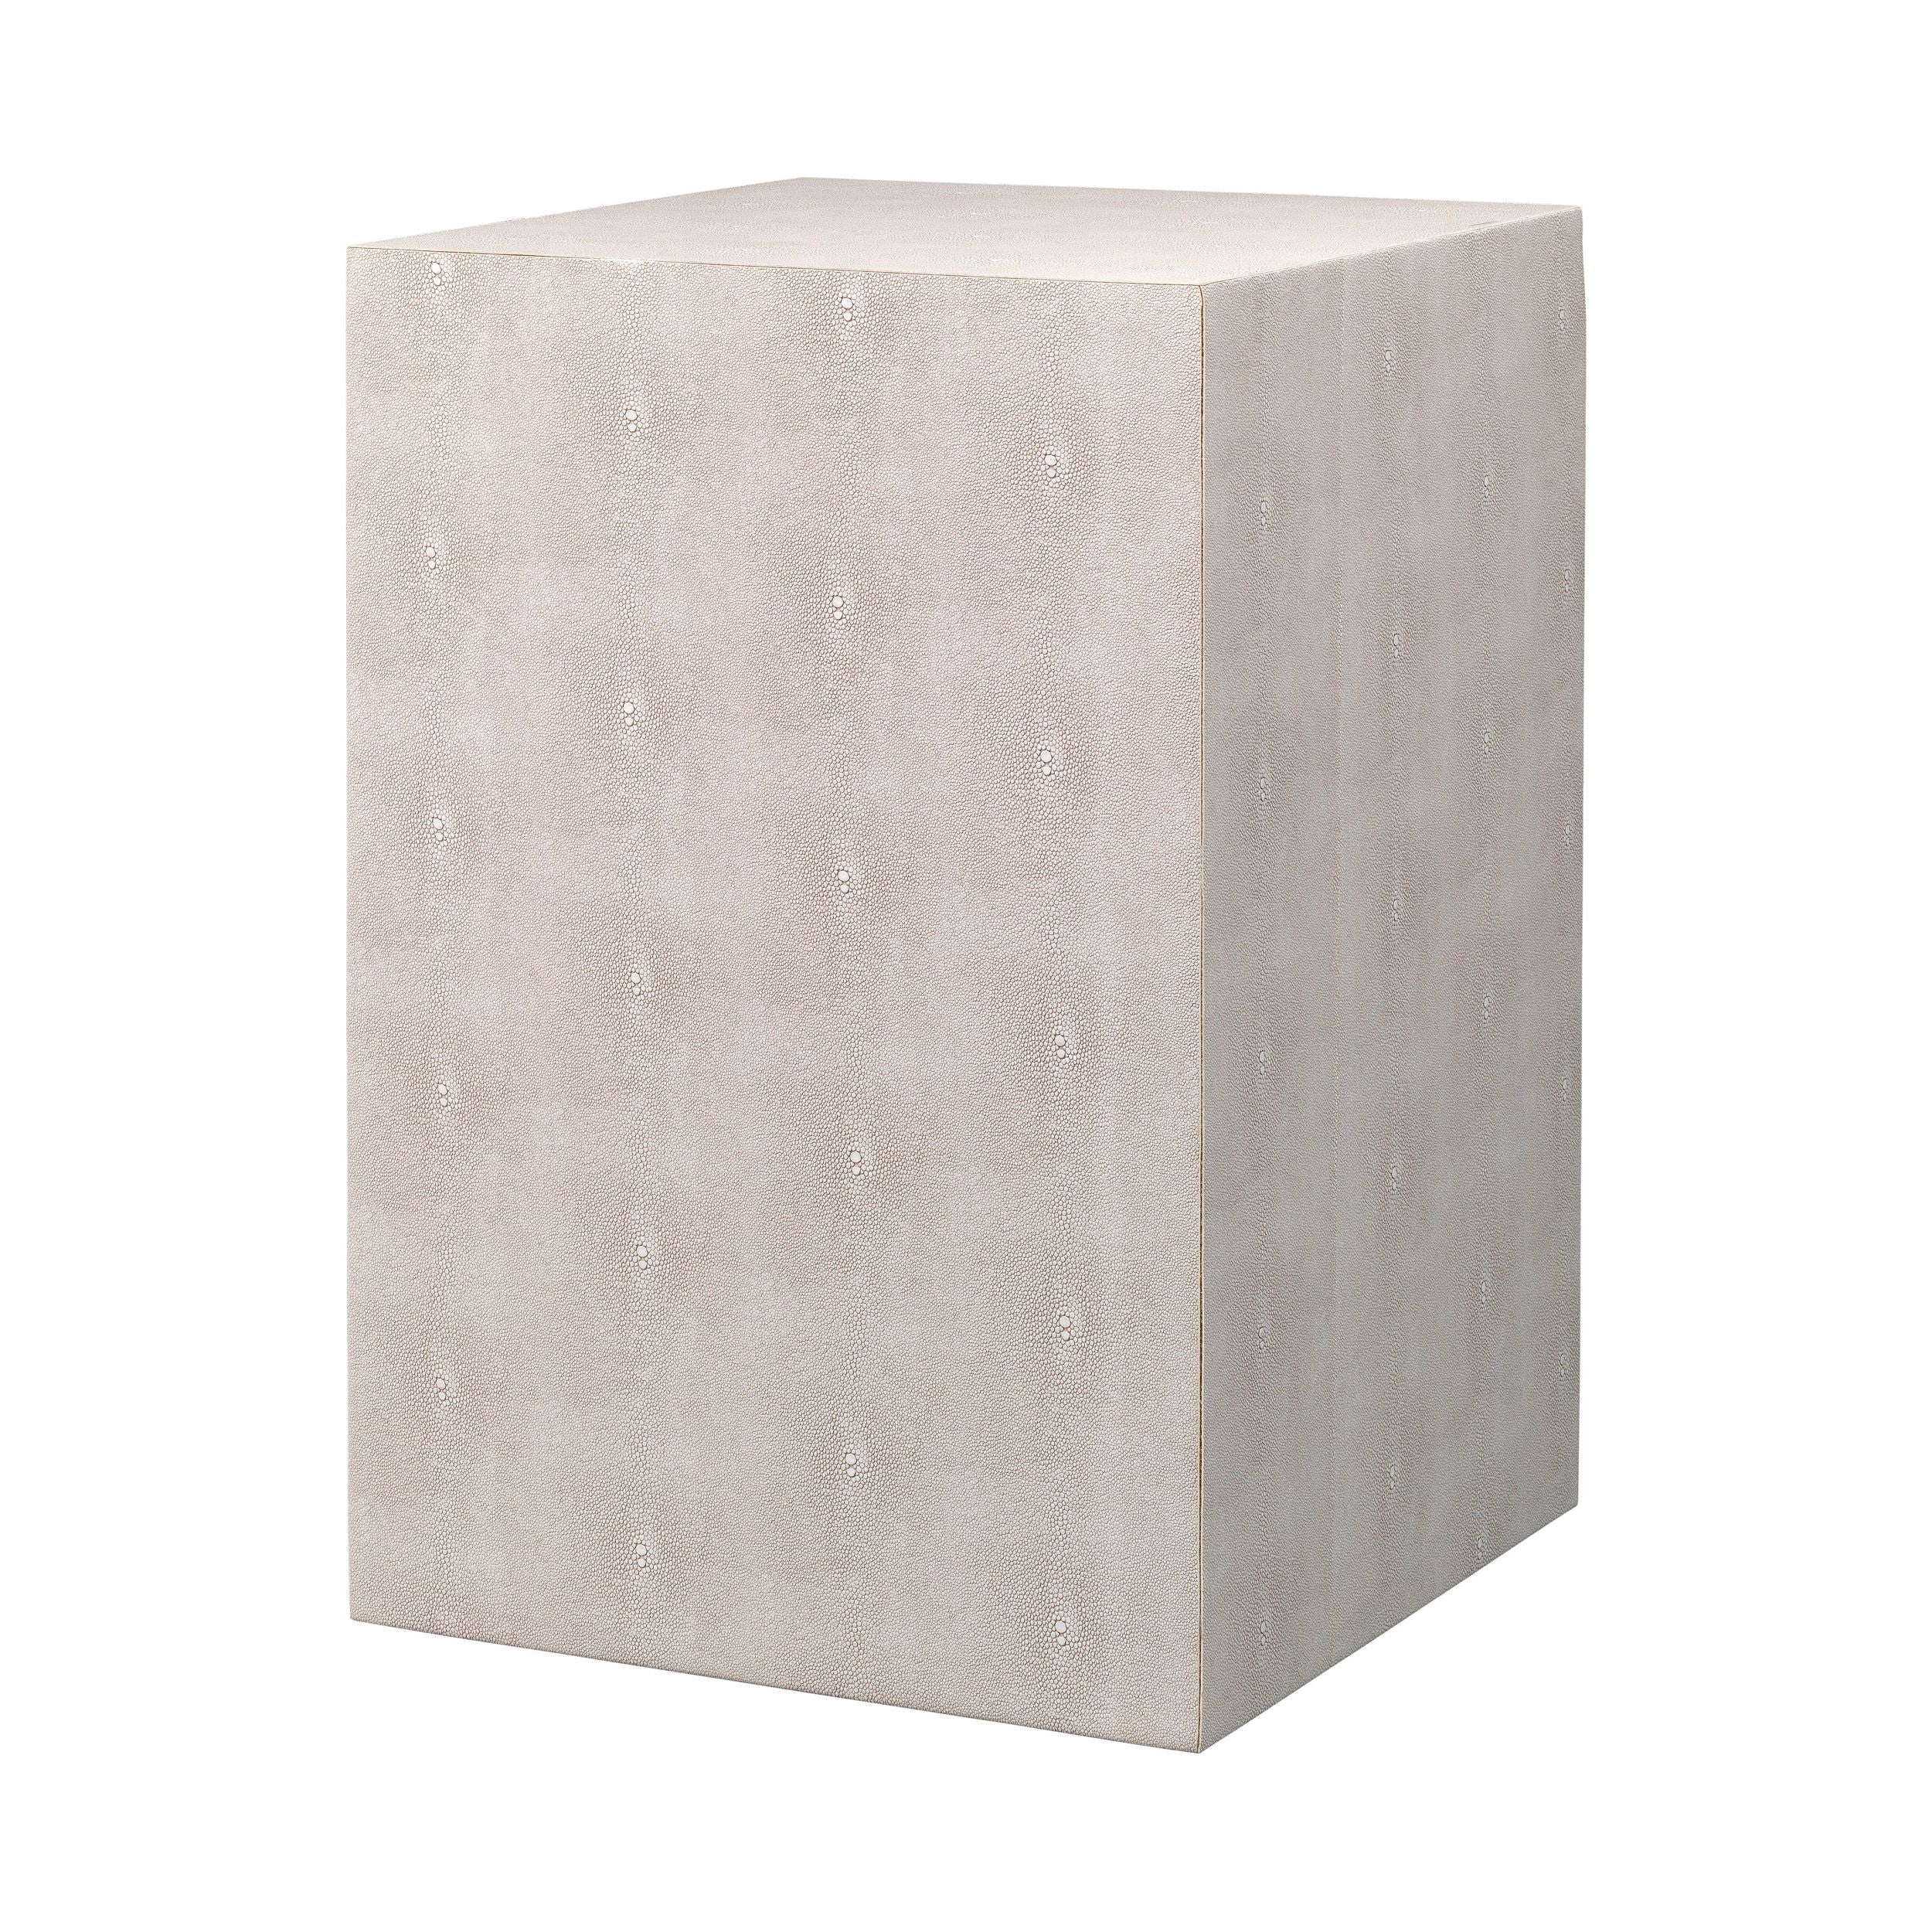 Jamie Young Company - LS20STRUSQIV - Structure Square Side Table - Structure - Cream